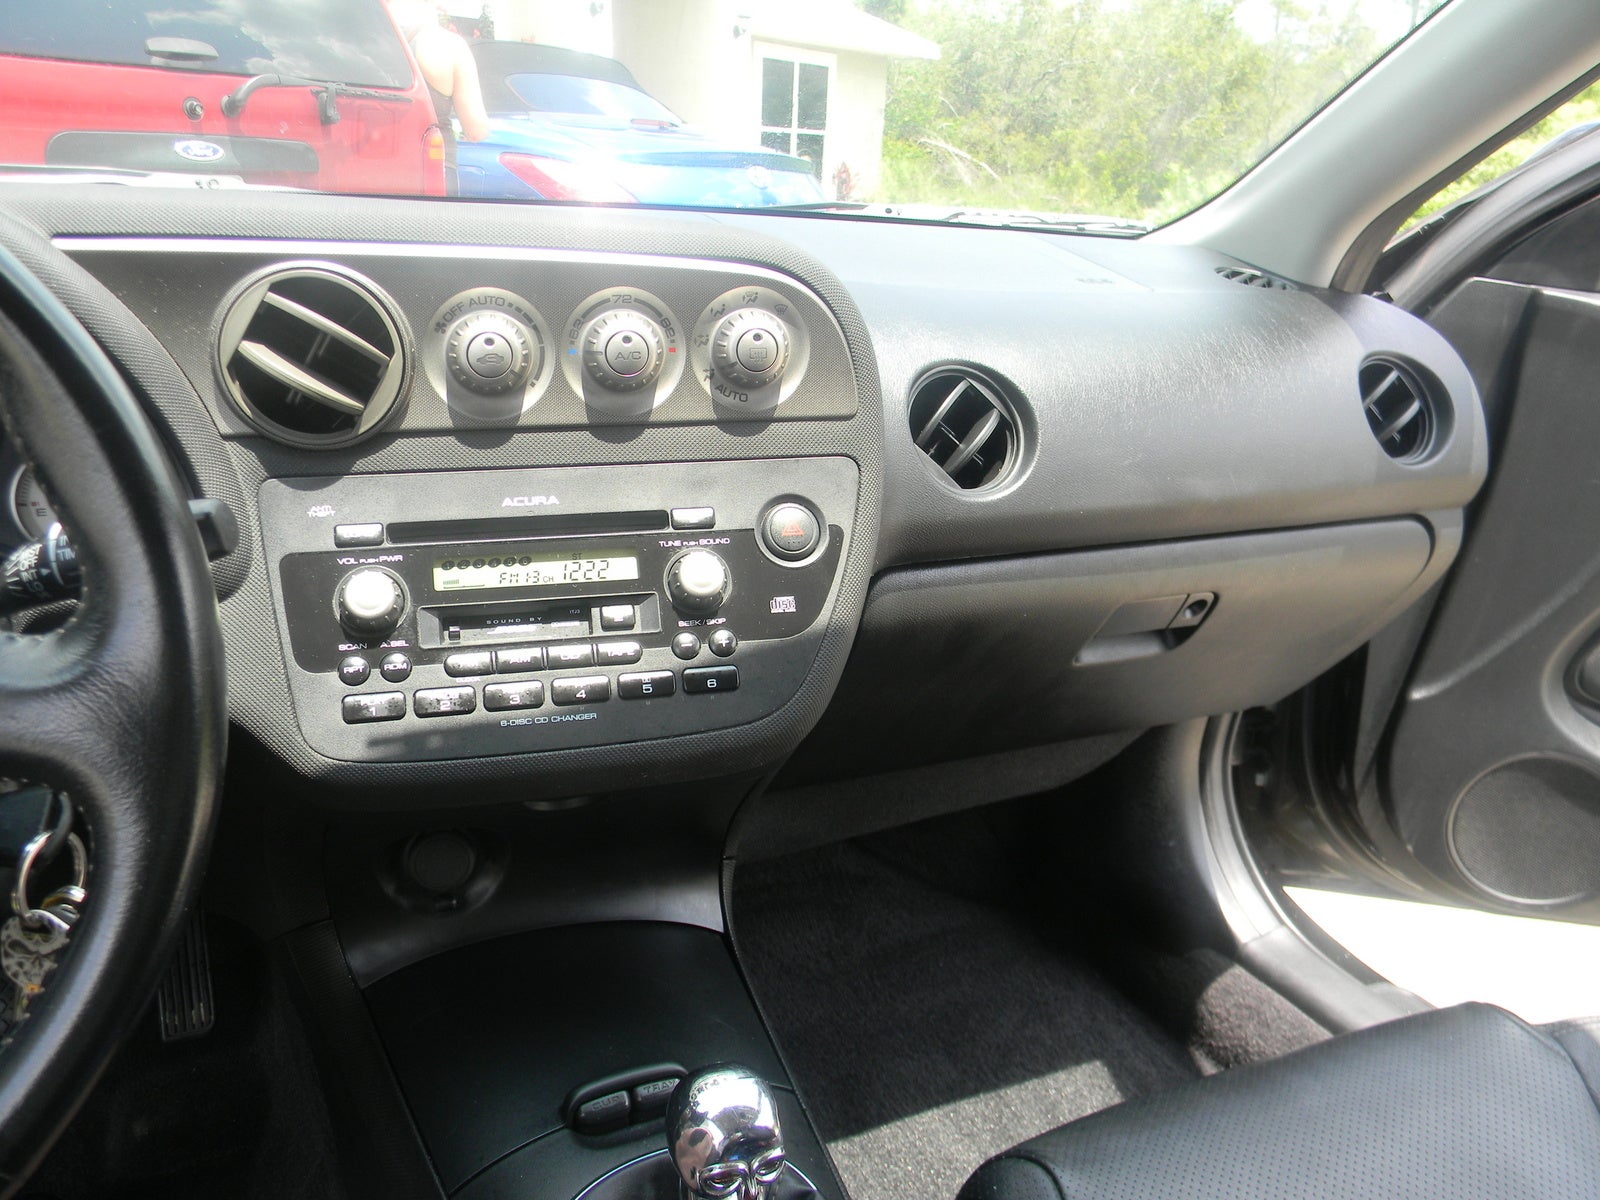 2006 Acura RSX - Interior Pictures - 2006 Acura RSX Type-S picture ...